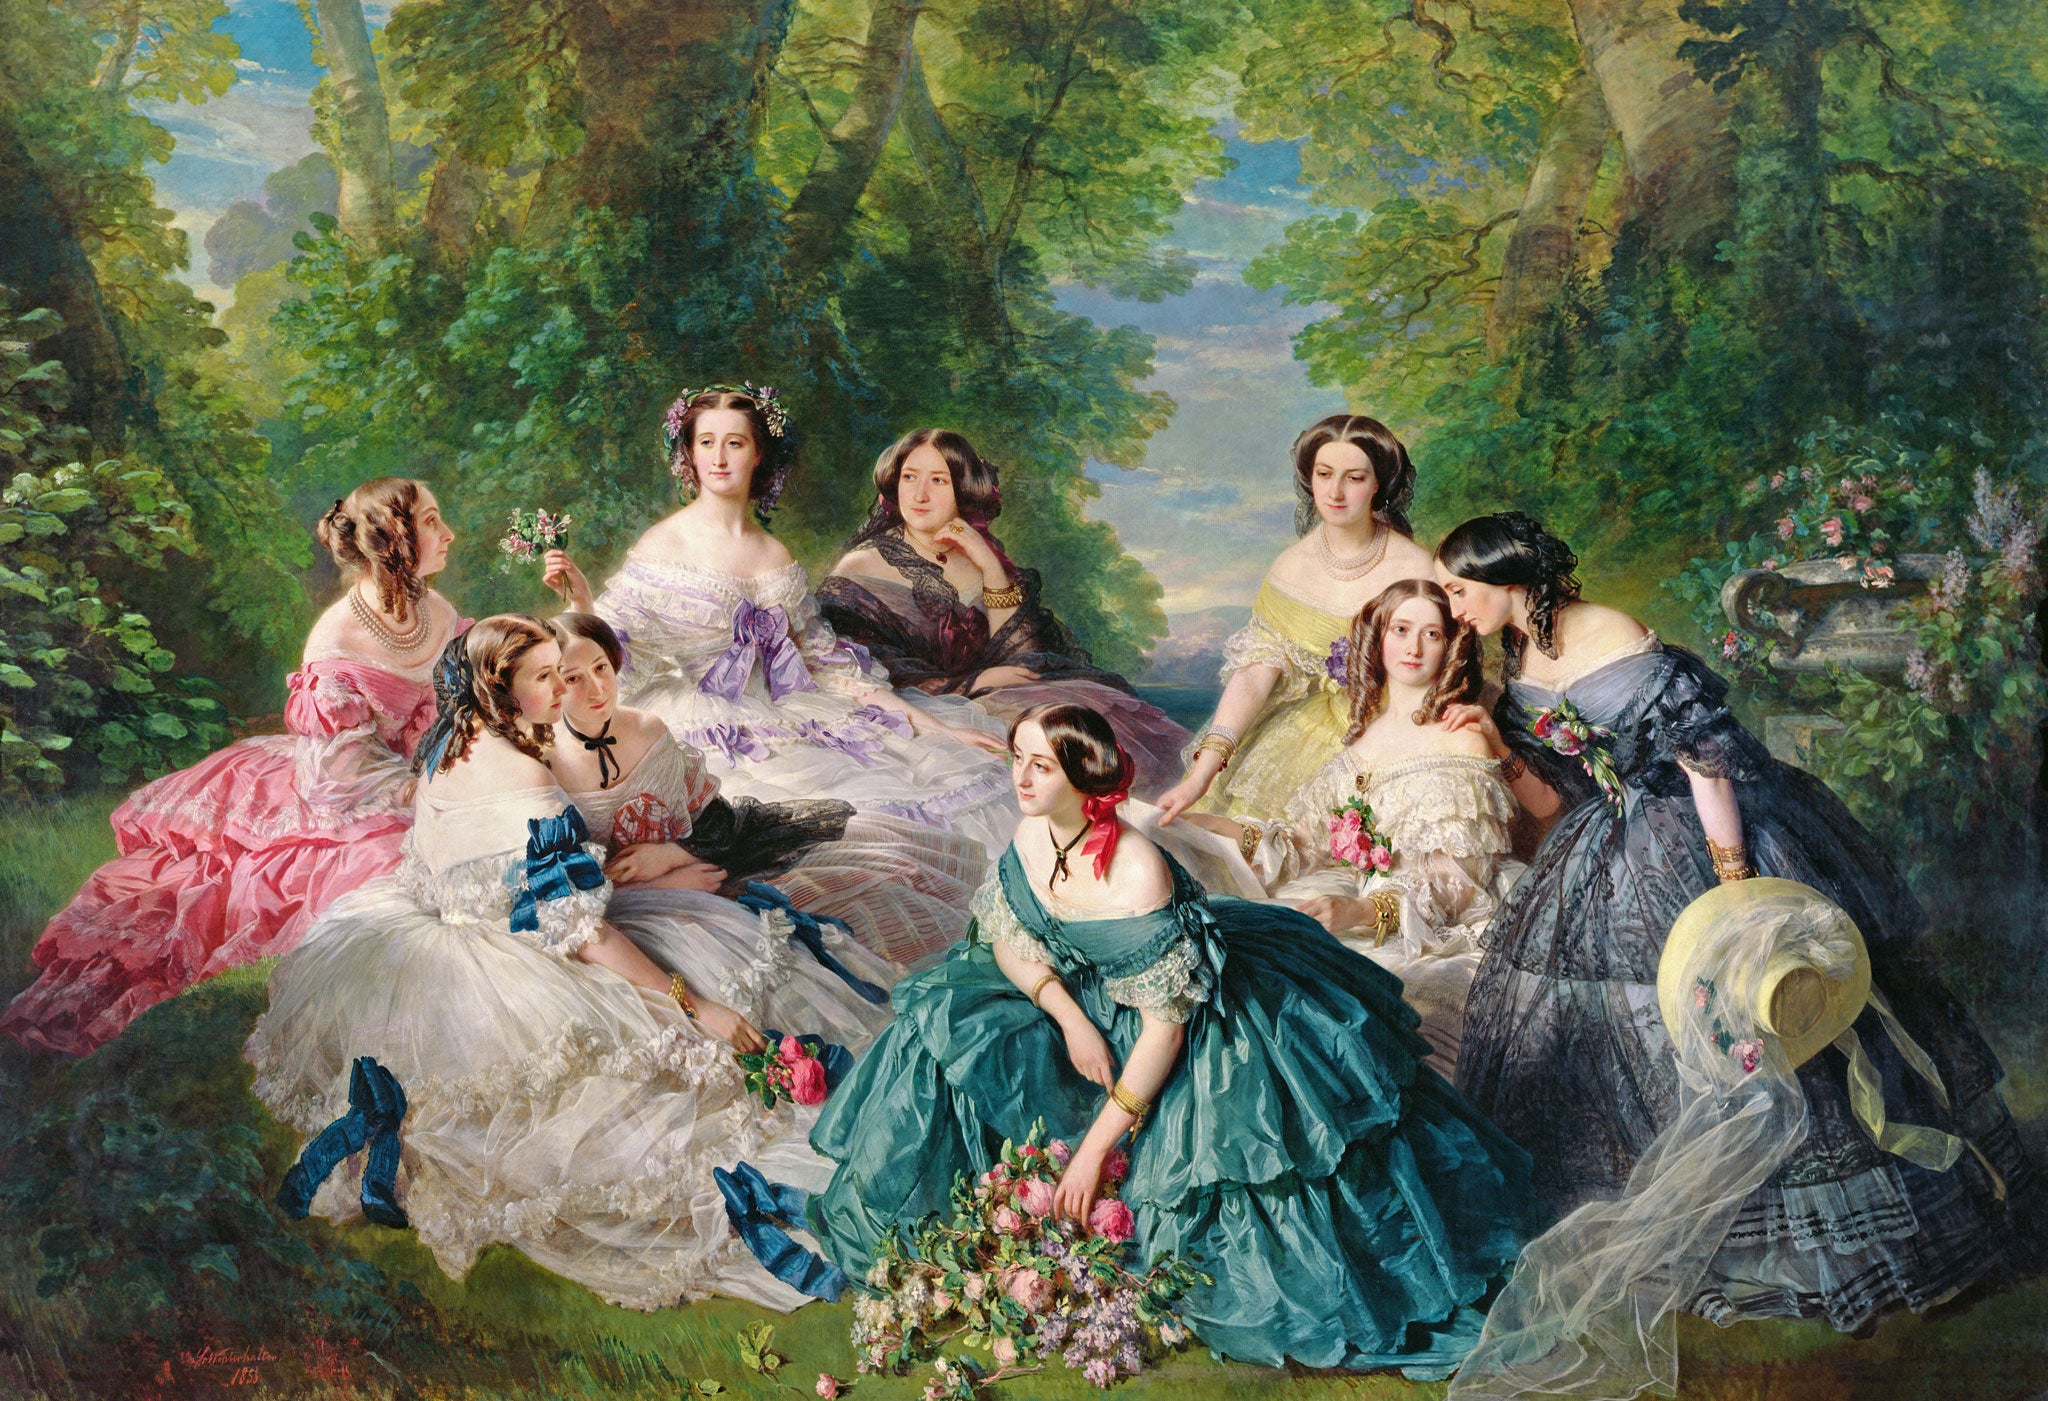 Empress Eugénie surrounded by her ladies in waiting, painted by Franz Xaver Winterhalter